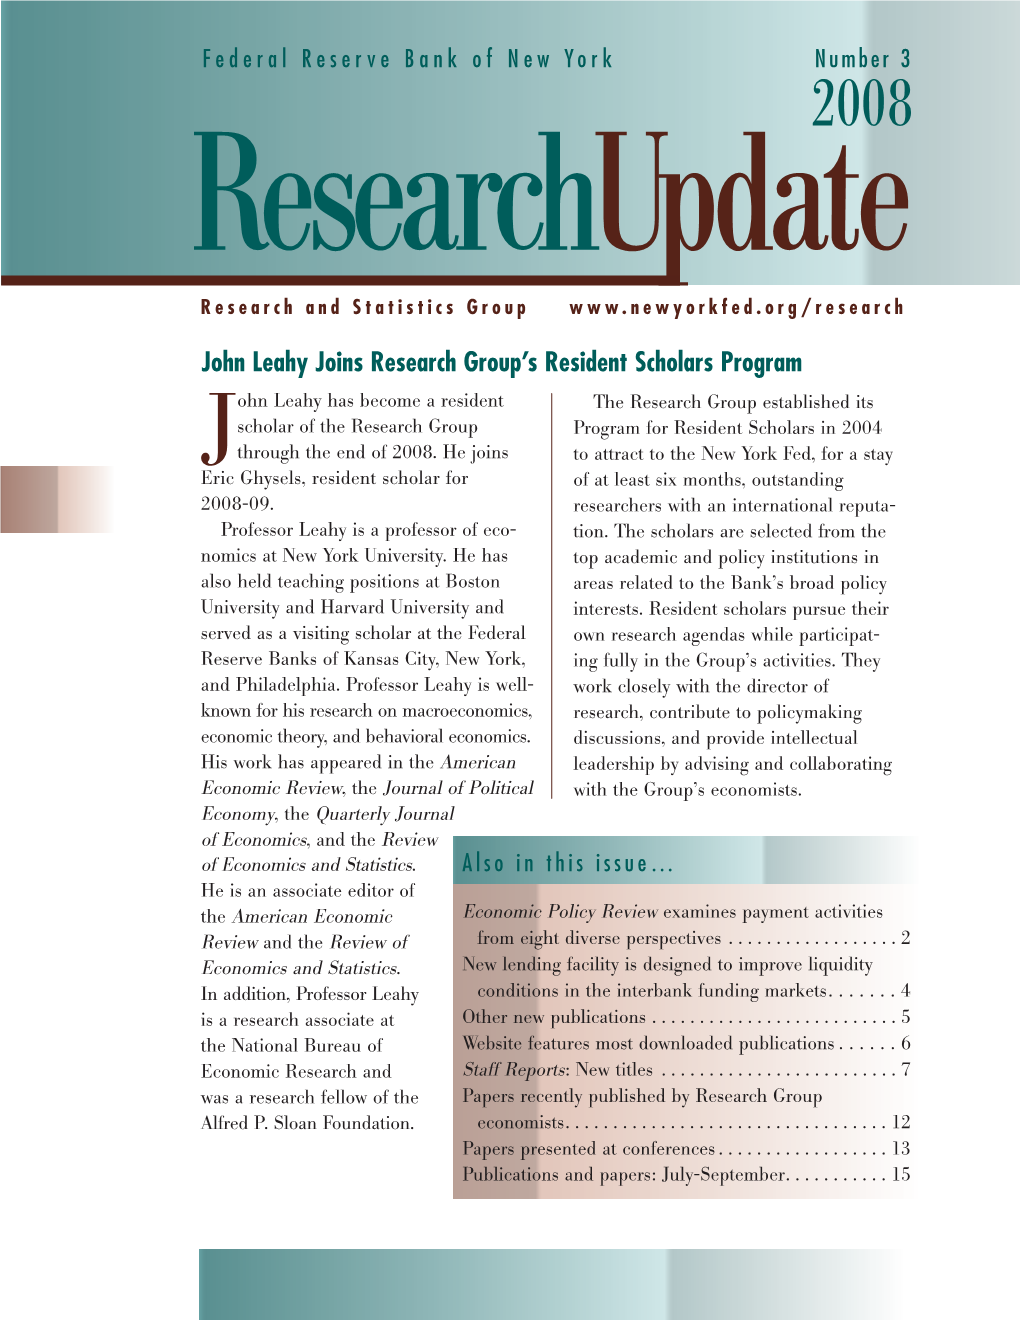 Research Update Newsletter